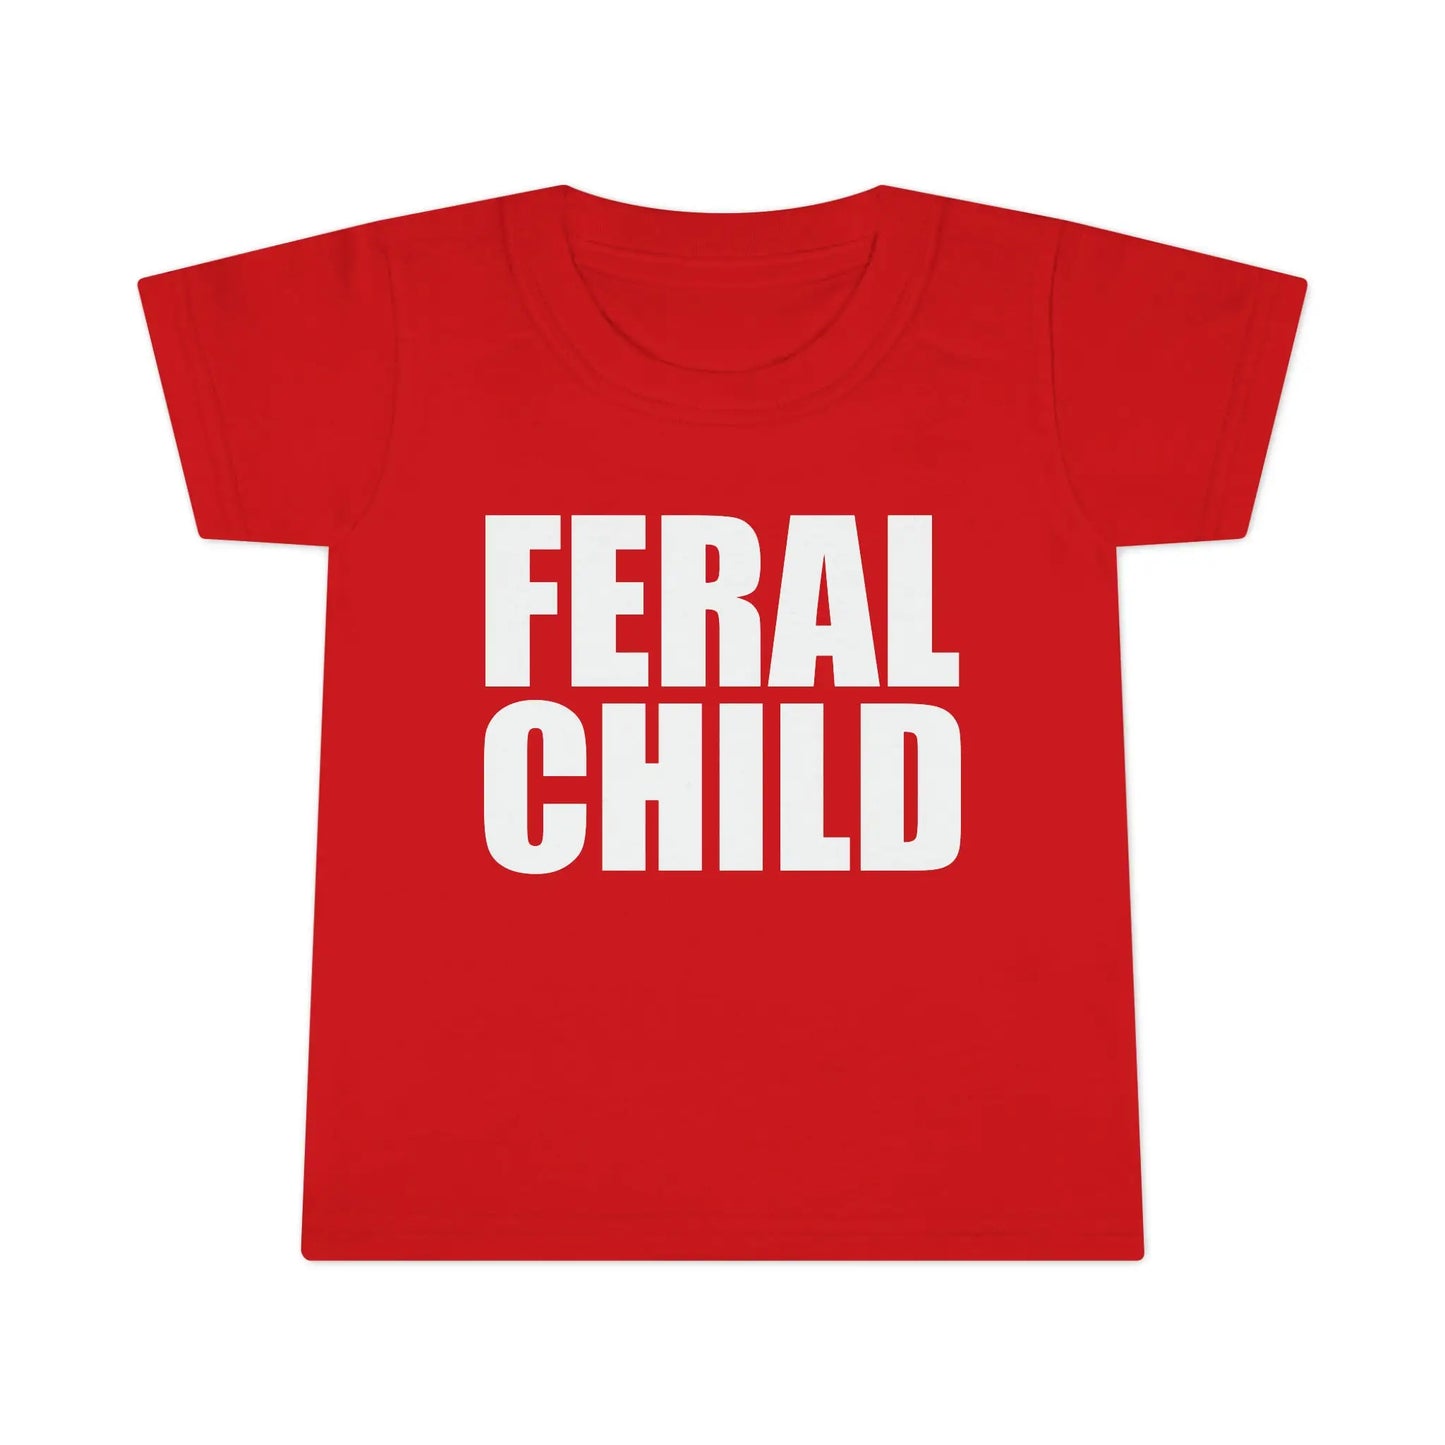 Feral Child Toddler T-shirt - Wicked Tees